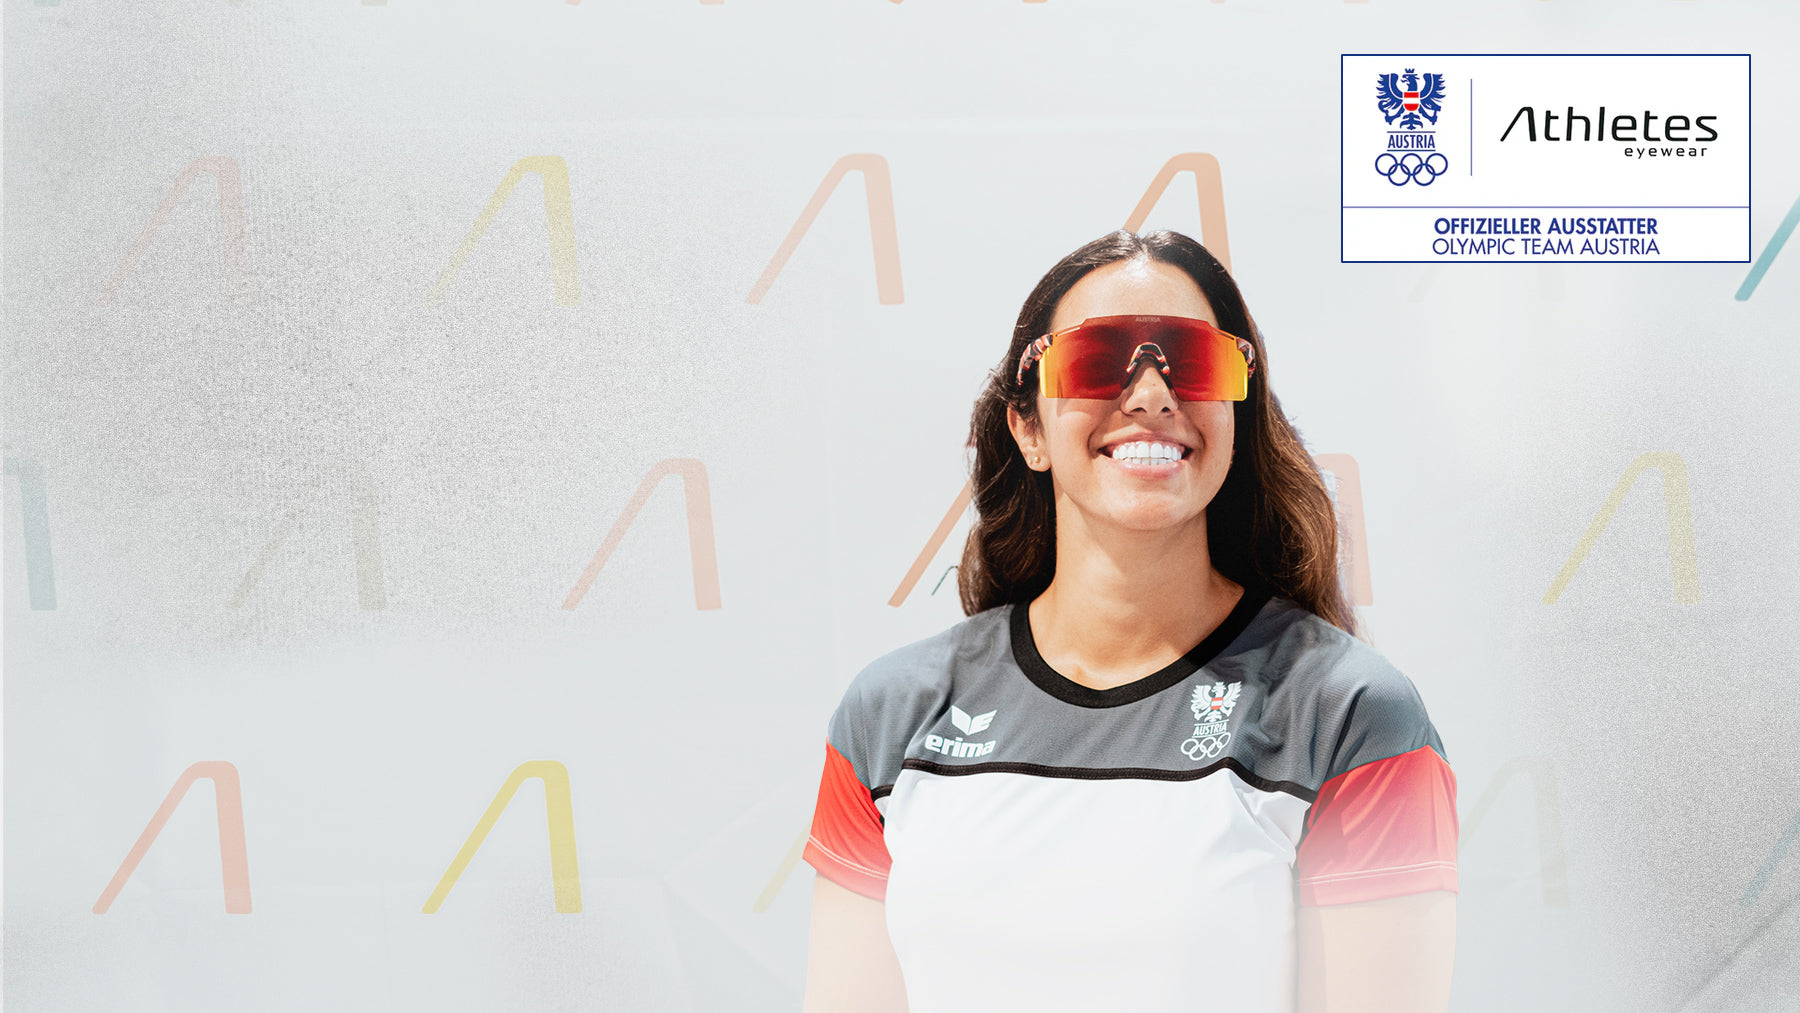 Woman of the Austrian Olympic team wears sporty sunglasses from Athletes Eyewear